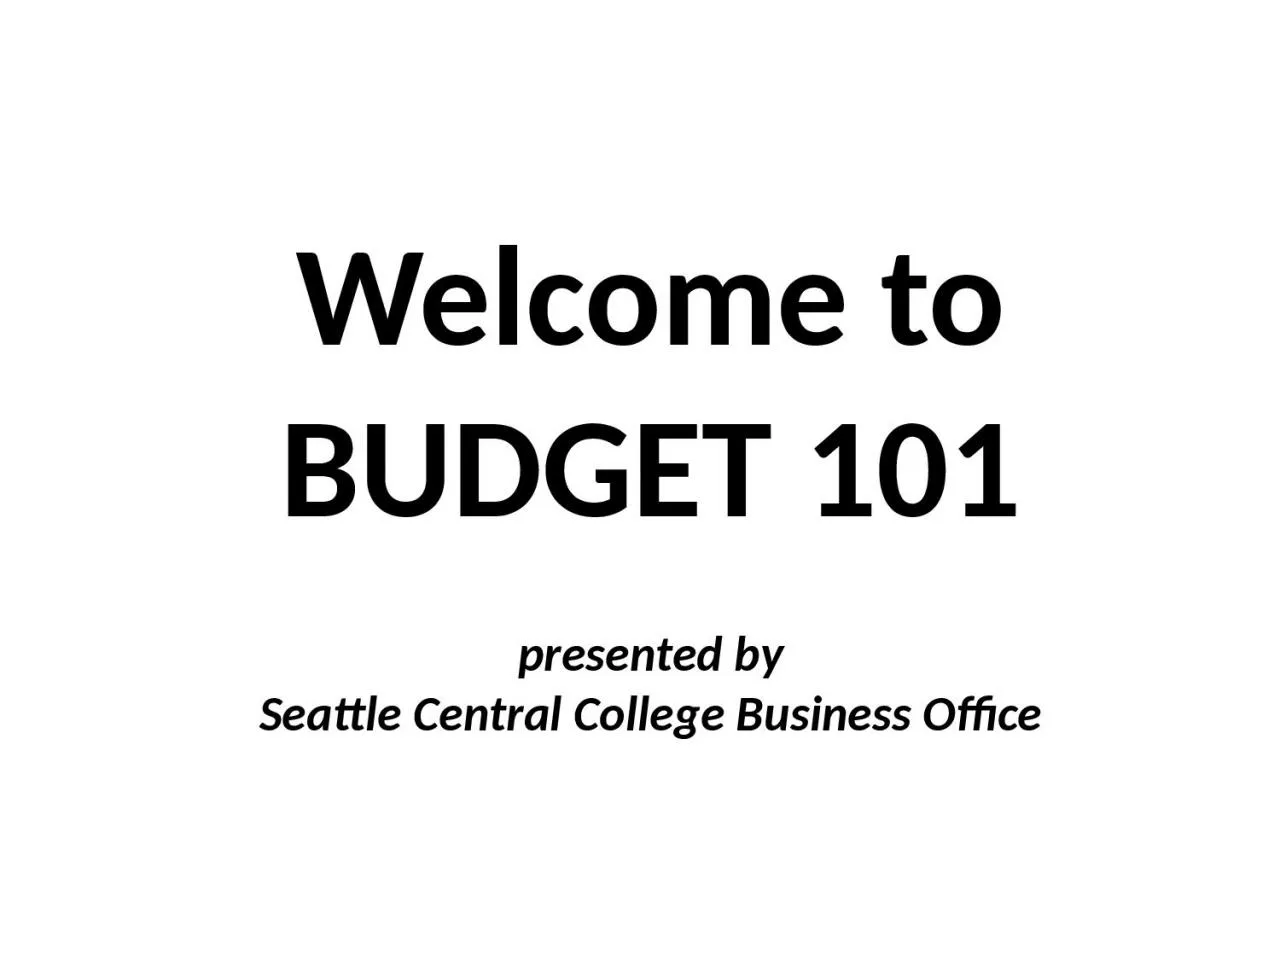 Welcome to BUDGET 101 presented by